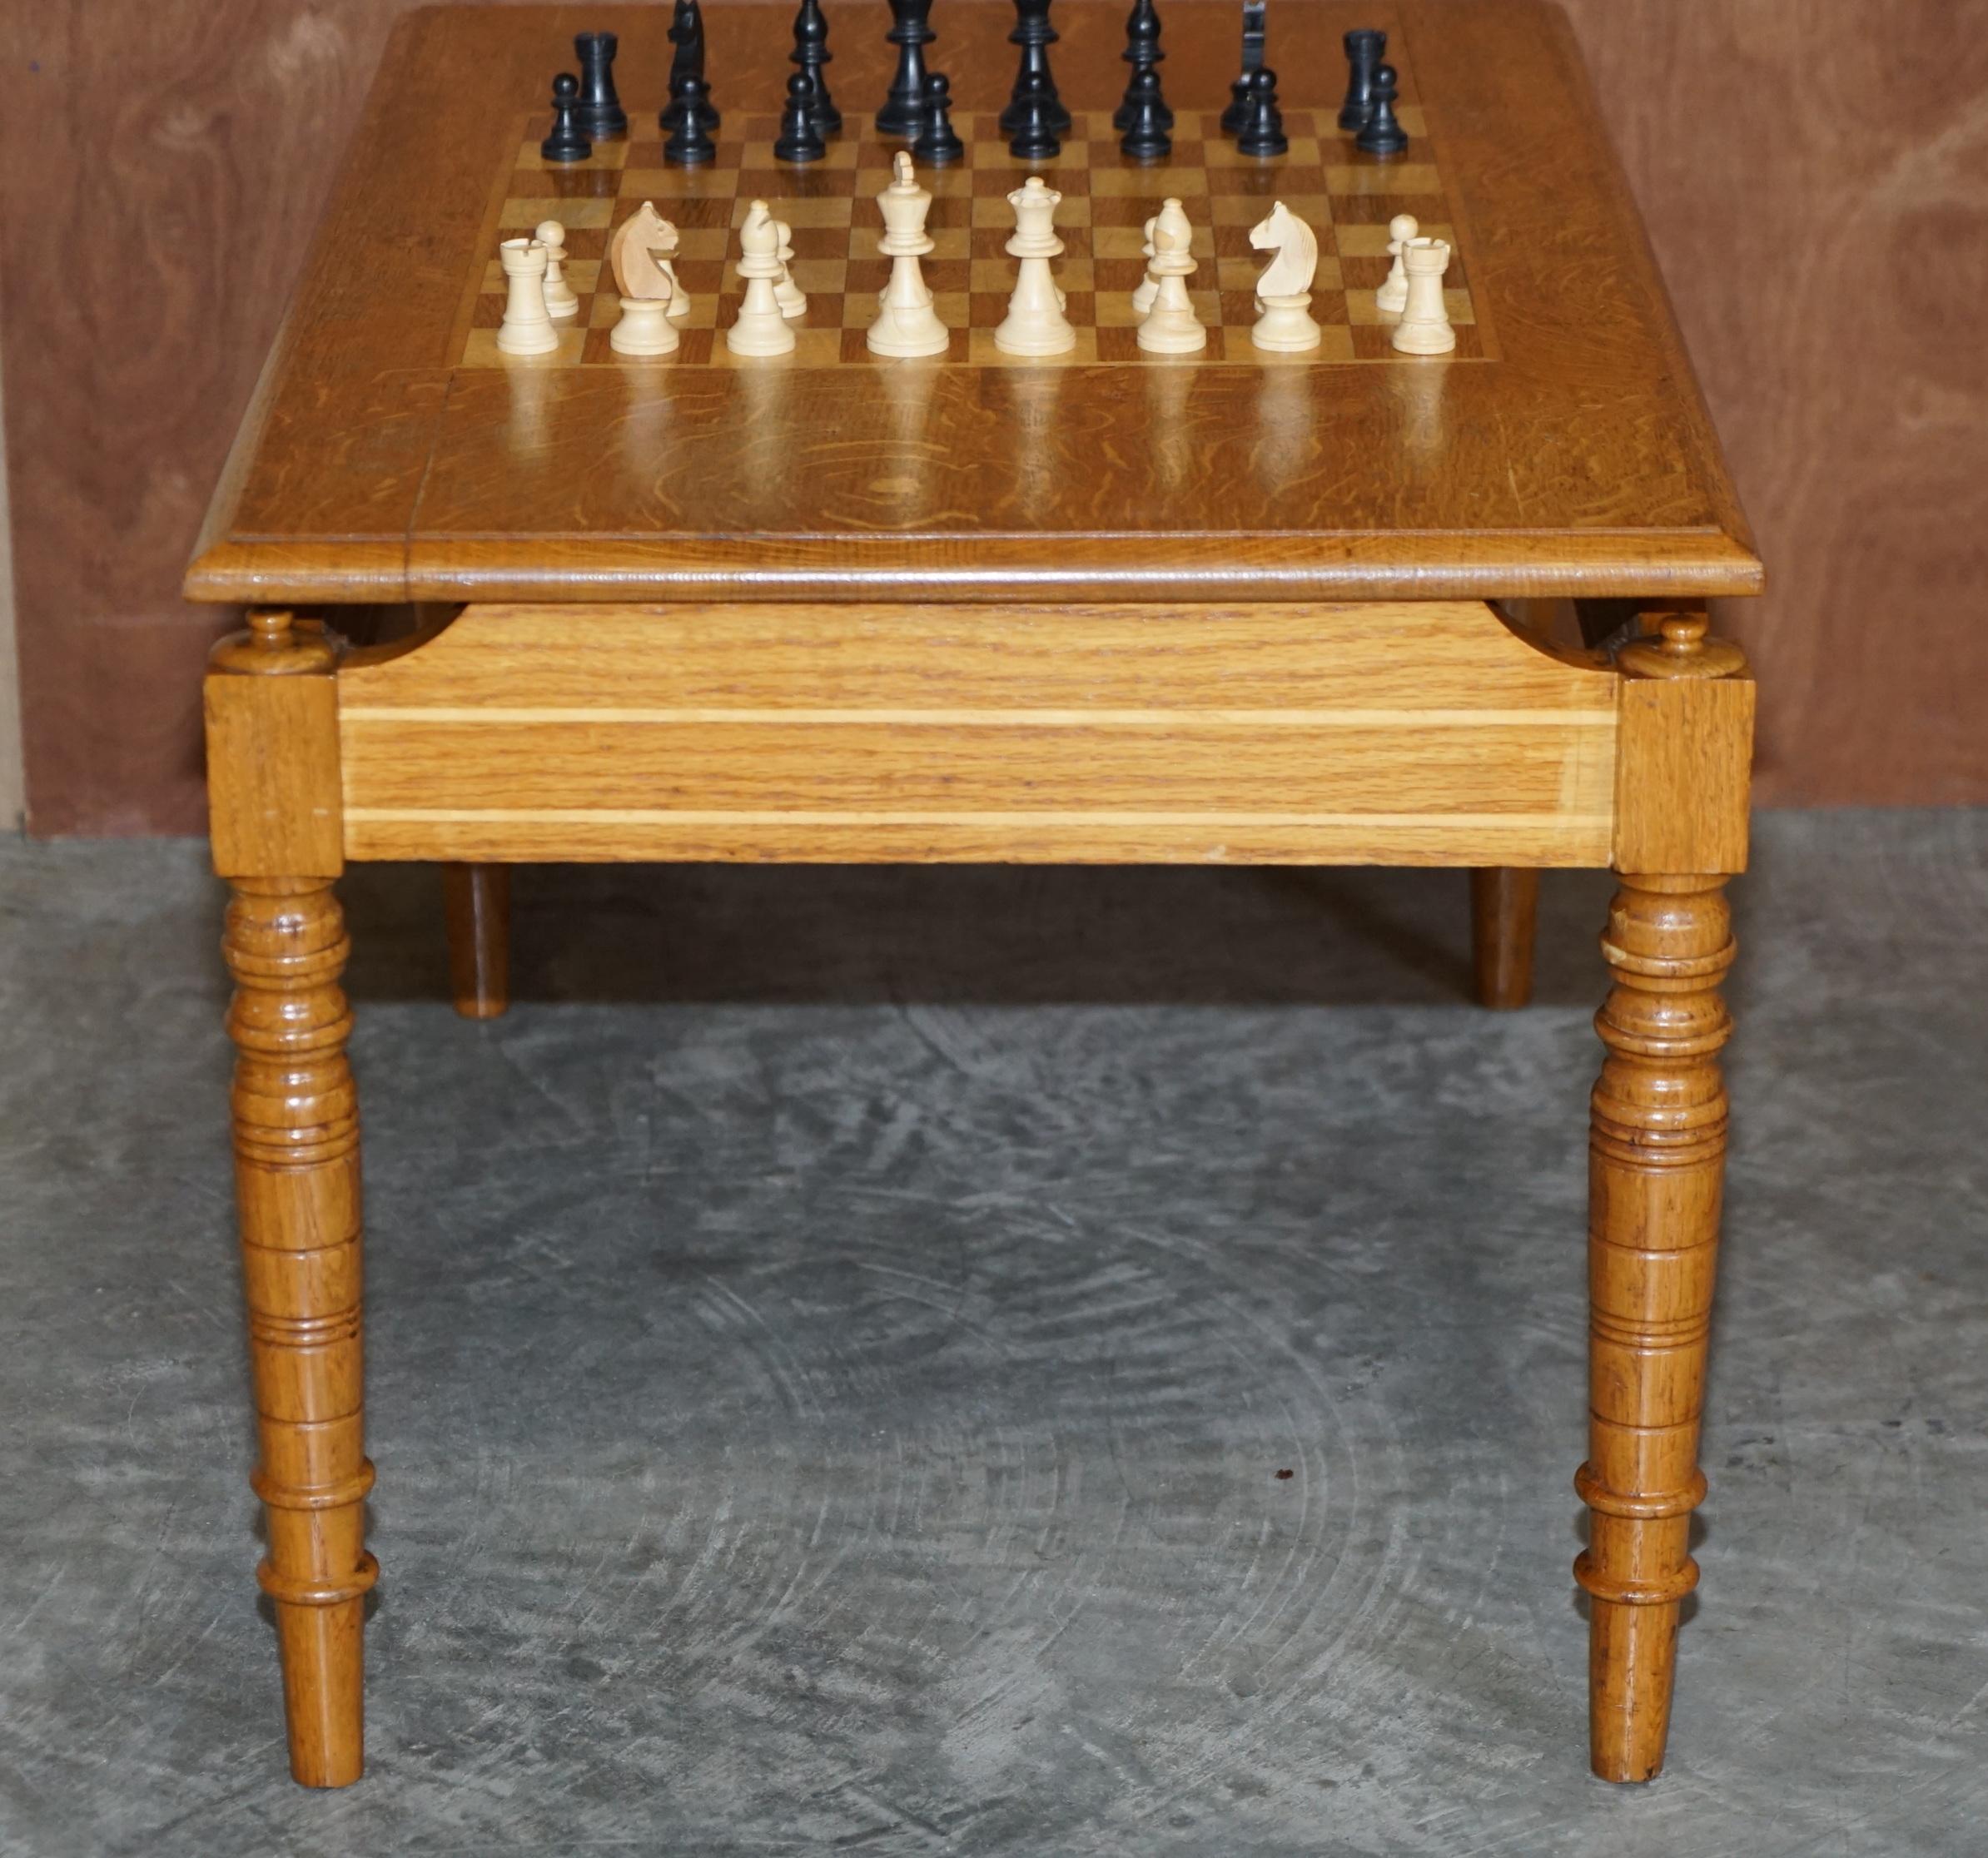 Vintage Honey Oak Chess Board Coffee Table with Vintage Ebonised Chess Set For Sale 6